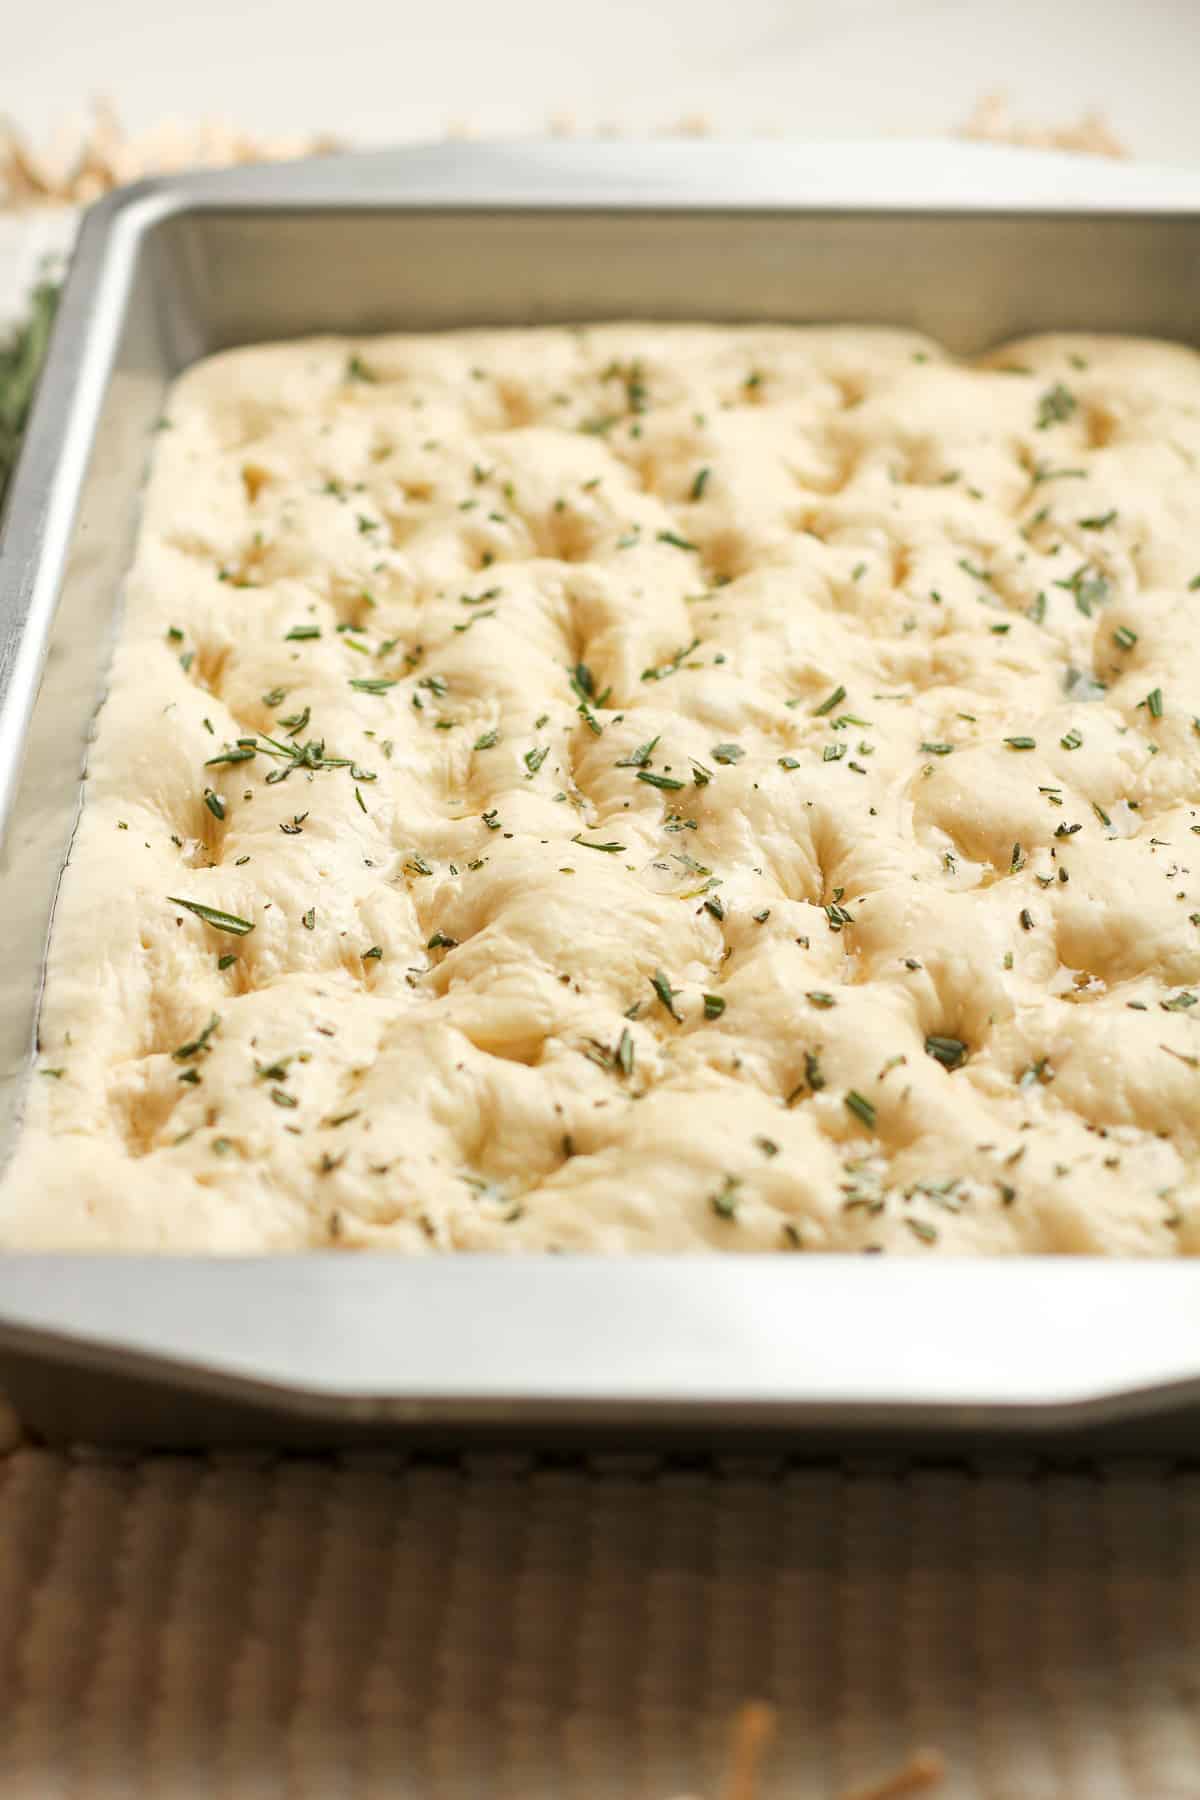 Side view of the focaccia dough in pan.